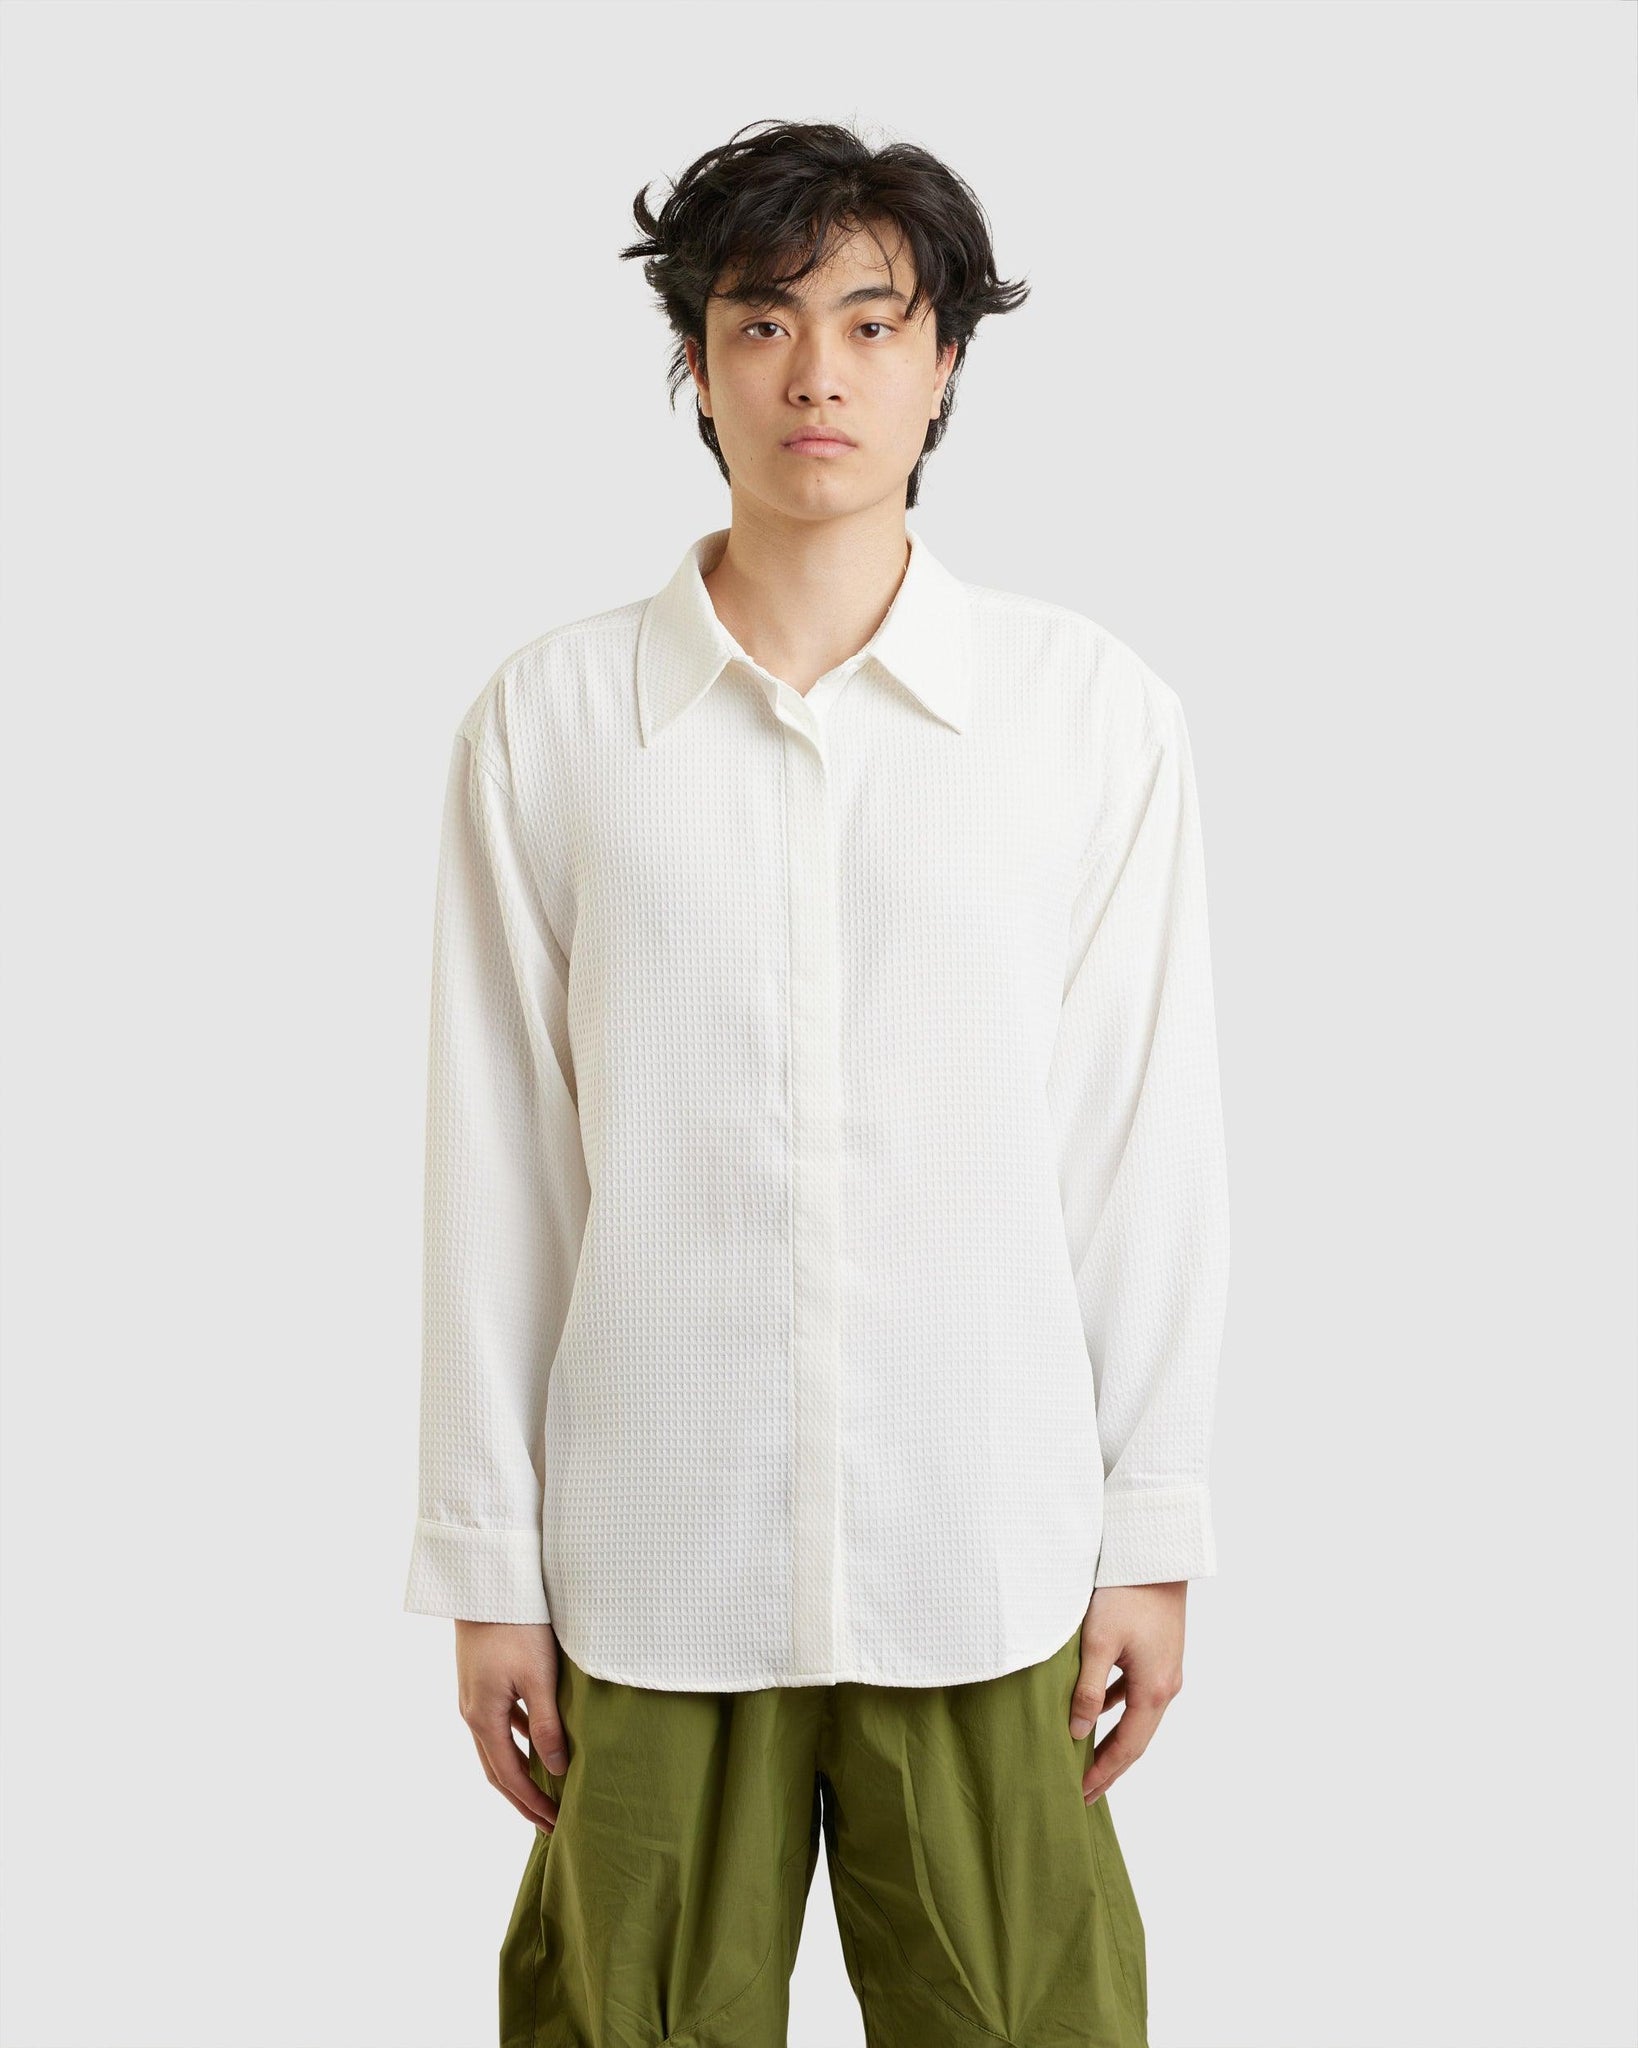 Dais Shirt White - {{ collection.title }} - Chinatown Country Club 